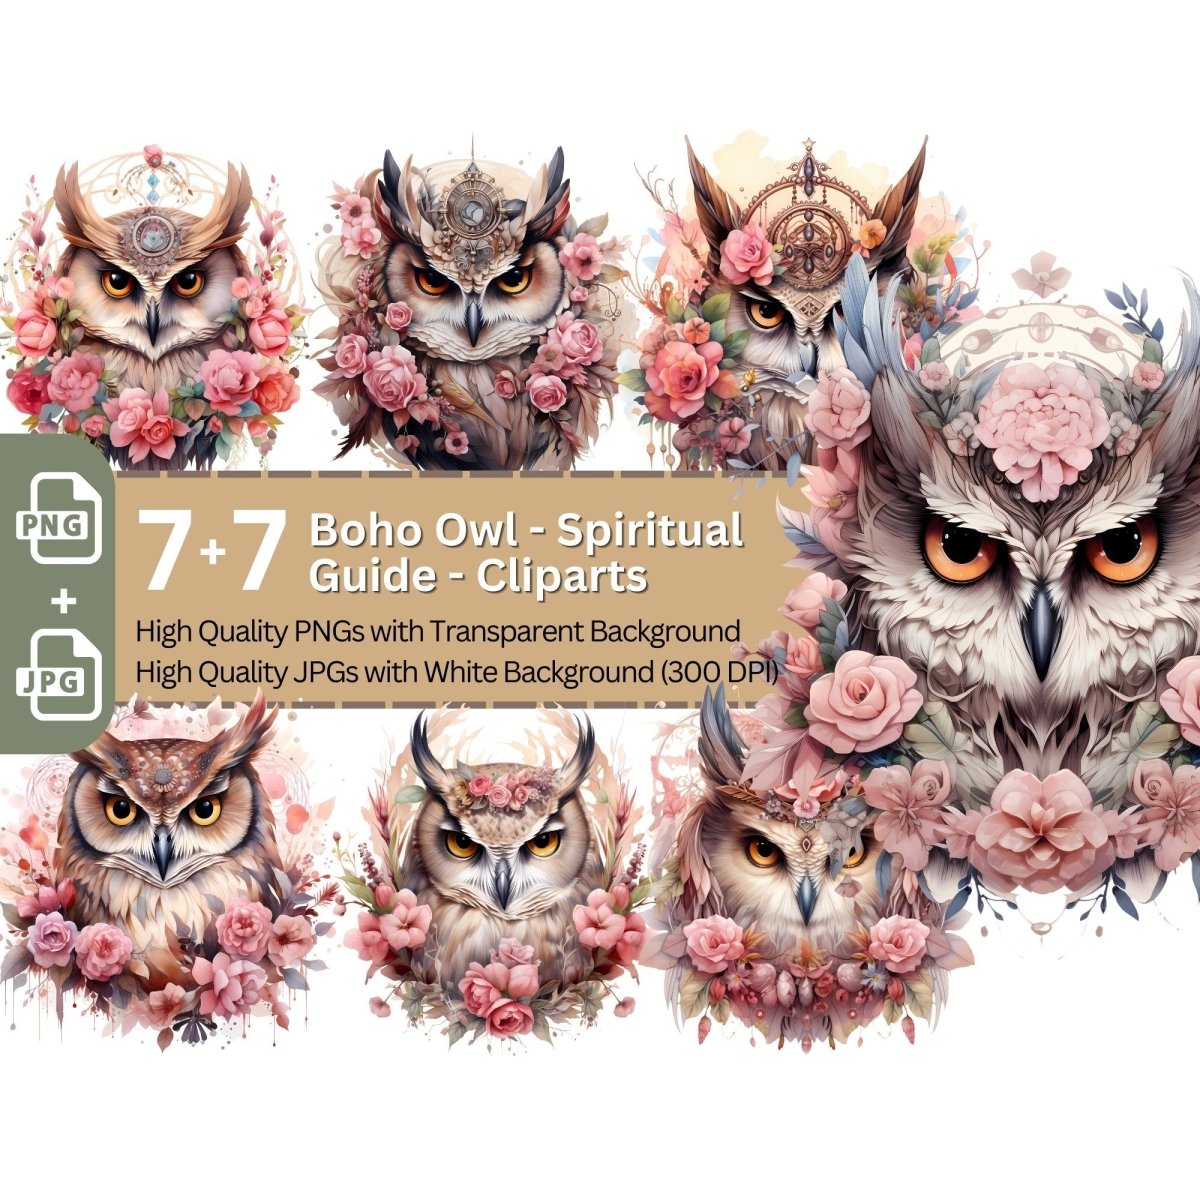 Boho Owl with Flowers Spiritual Guide Cliparts 7+7 High Quality PNG Animal - Everything Pixel